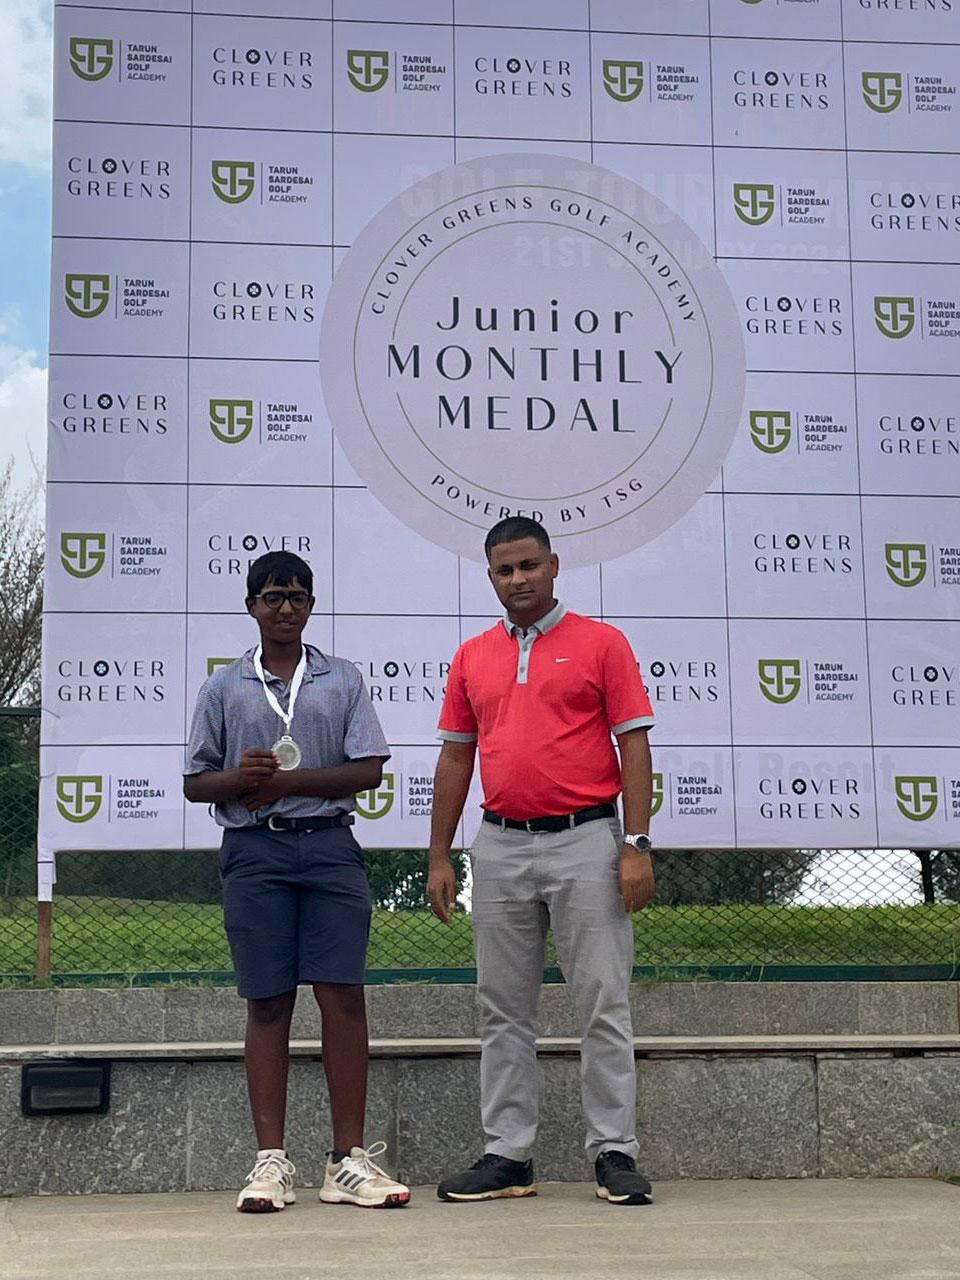 Darahas Panditi  finished as runner up in the 'C' Boys  Category at the Clover Greens Junior Monthly Medal powered by TSG, held at Clover Greens Golf Course in Bangalore.